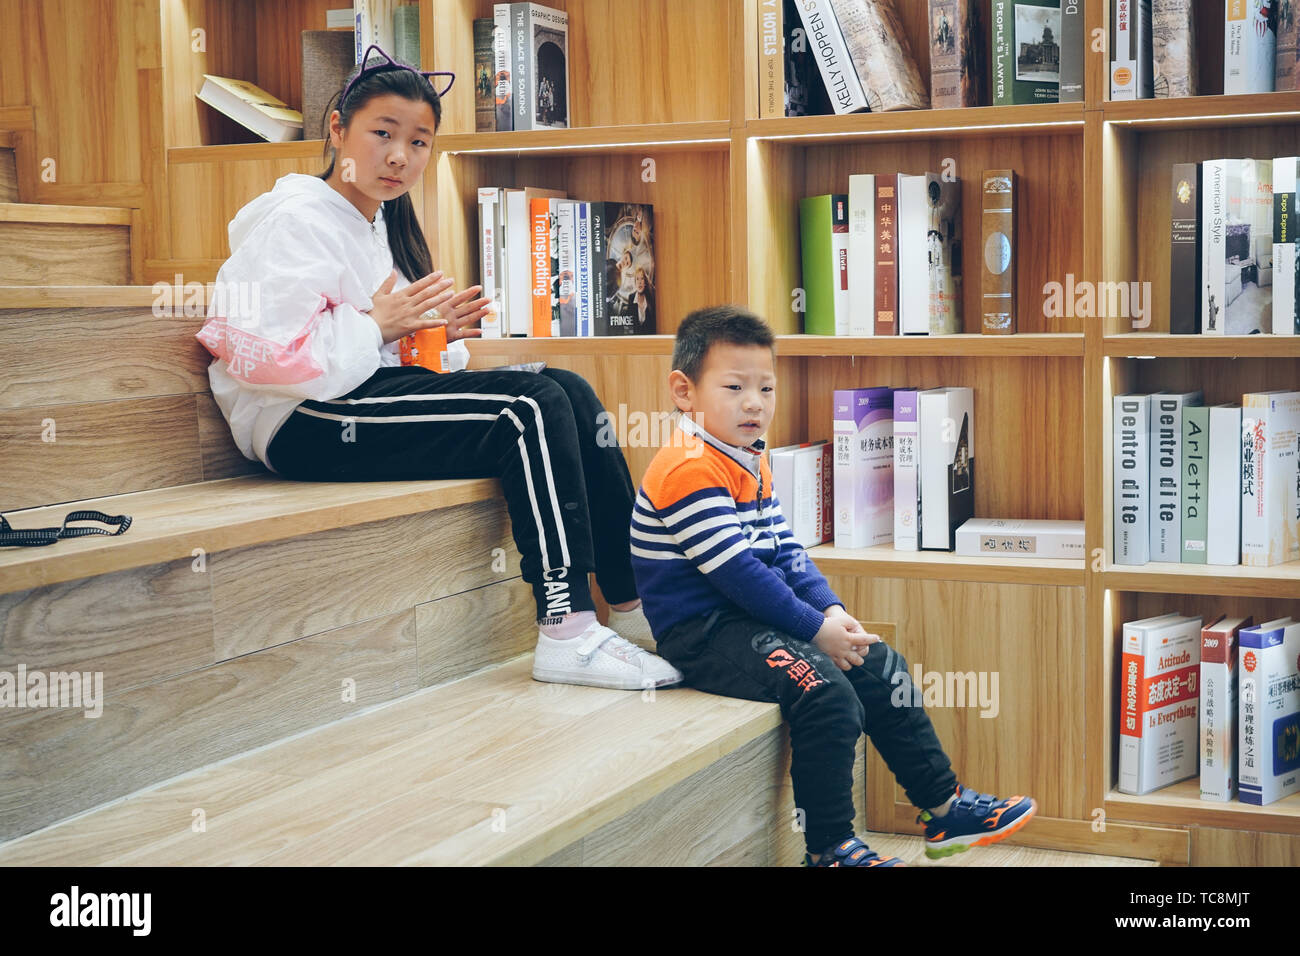 Filmed in the Xinhua Bookstore in Sihong County, Jiangsu Province on April 21, 2019, the spirit of serious learning made me press the shutter. They were too focused and did not find that I was filming them at all! Stock Photo